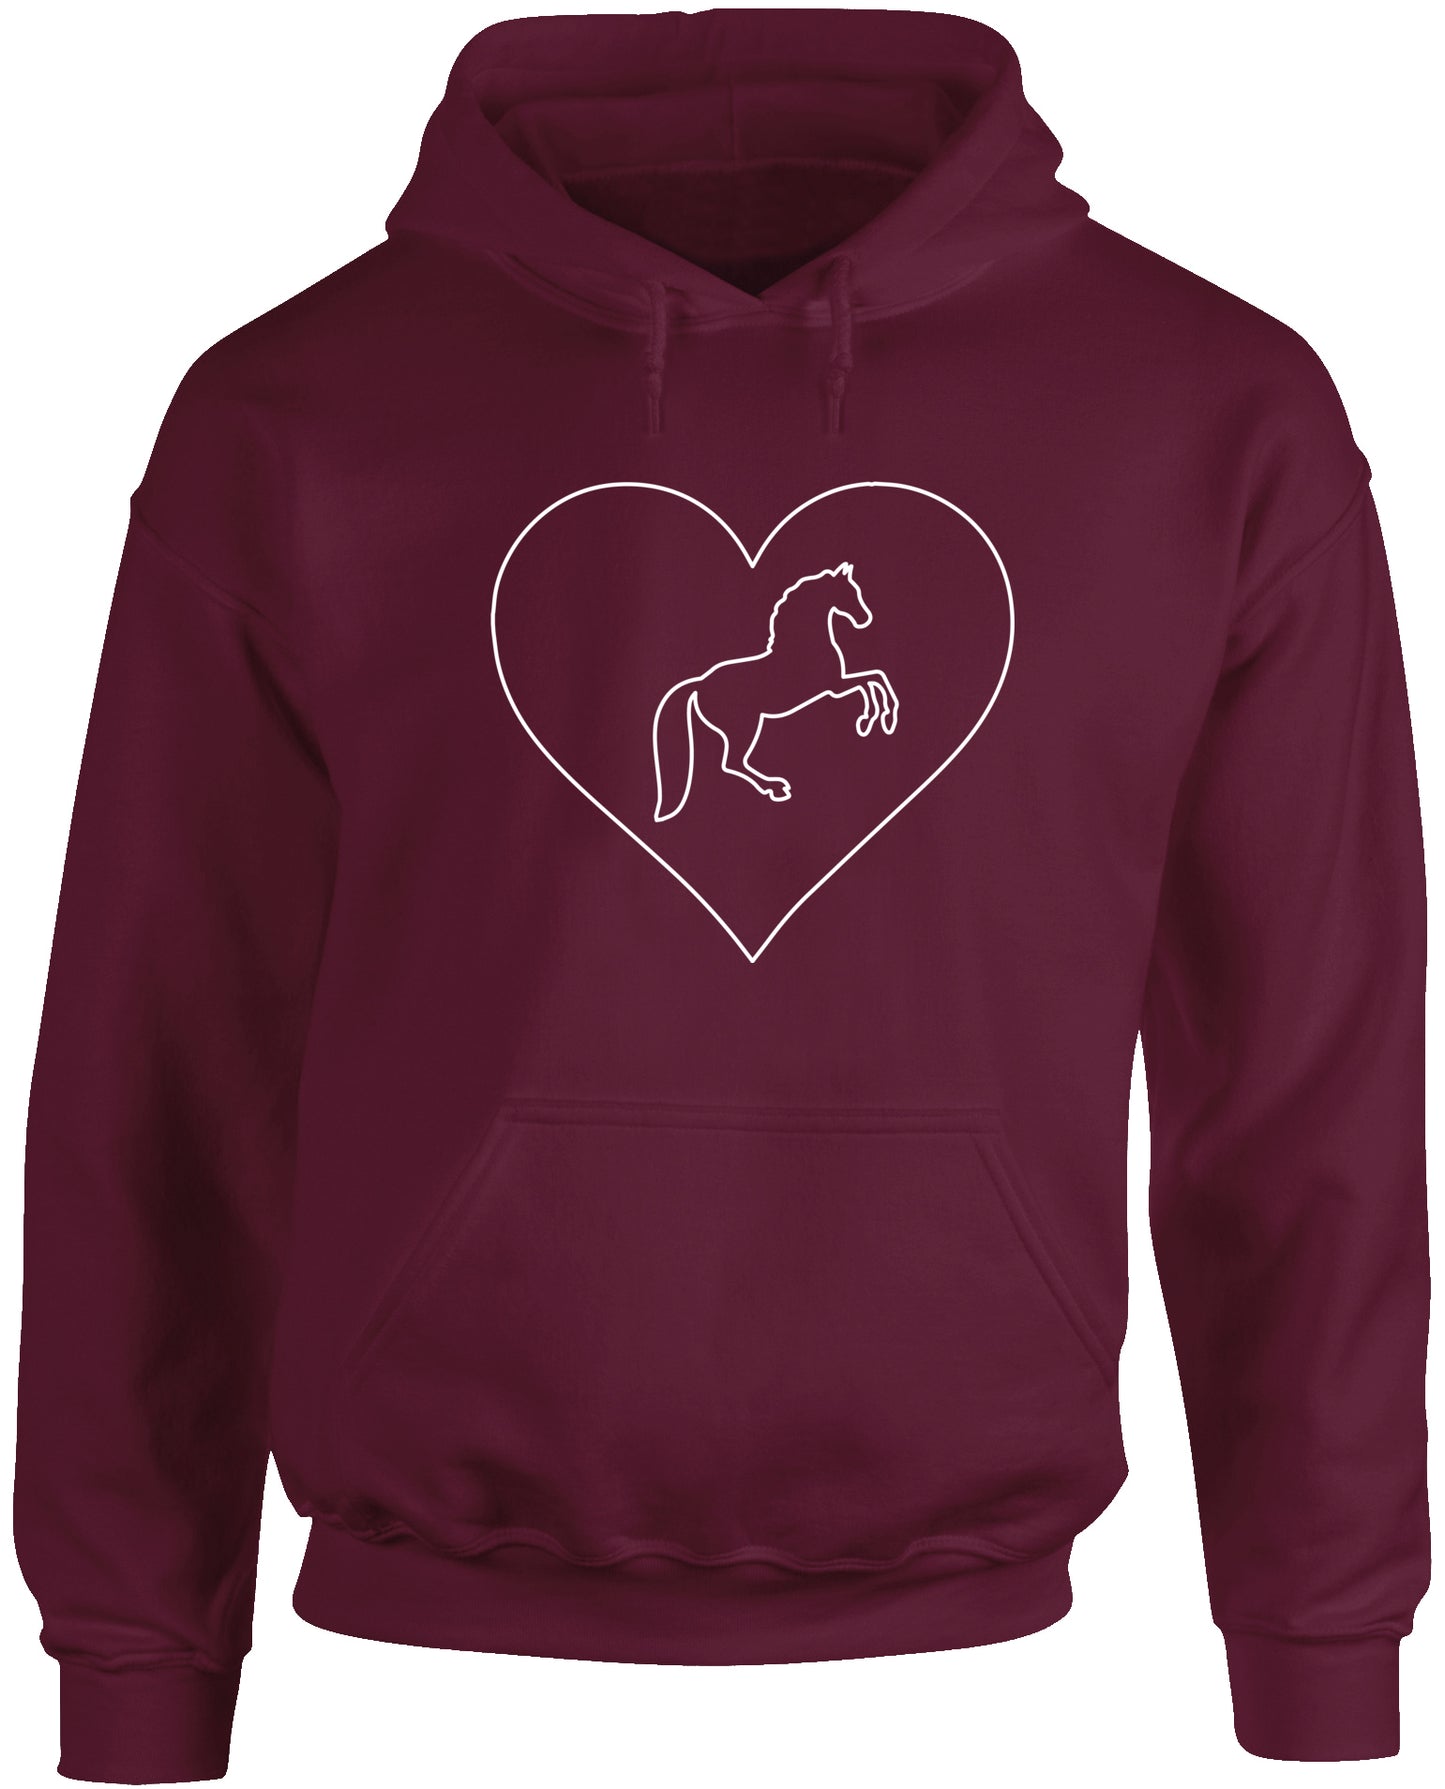 Heart Horse Riding unisex Hoodie hooded top